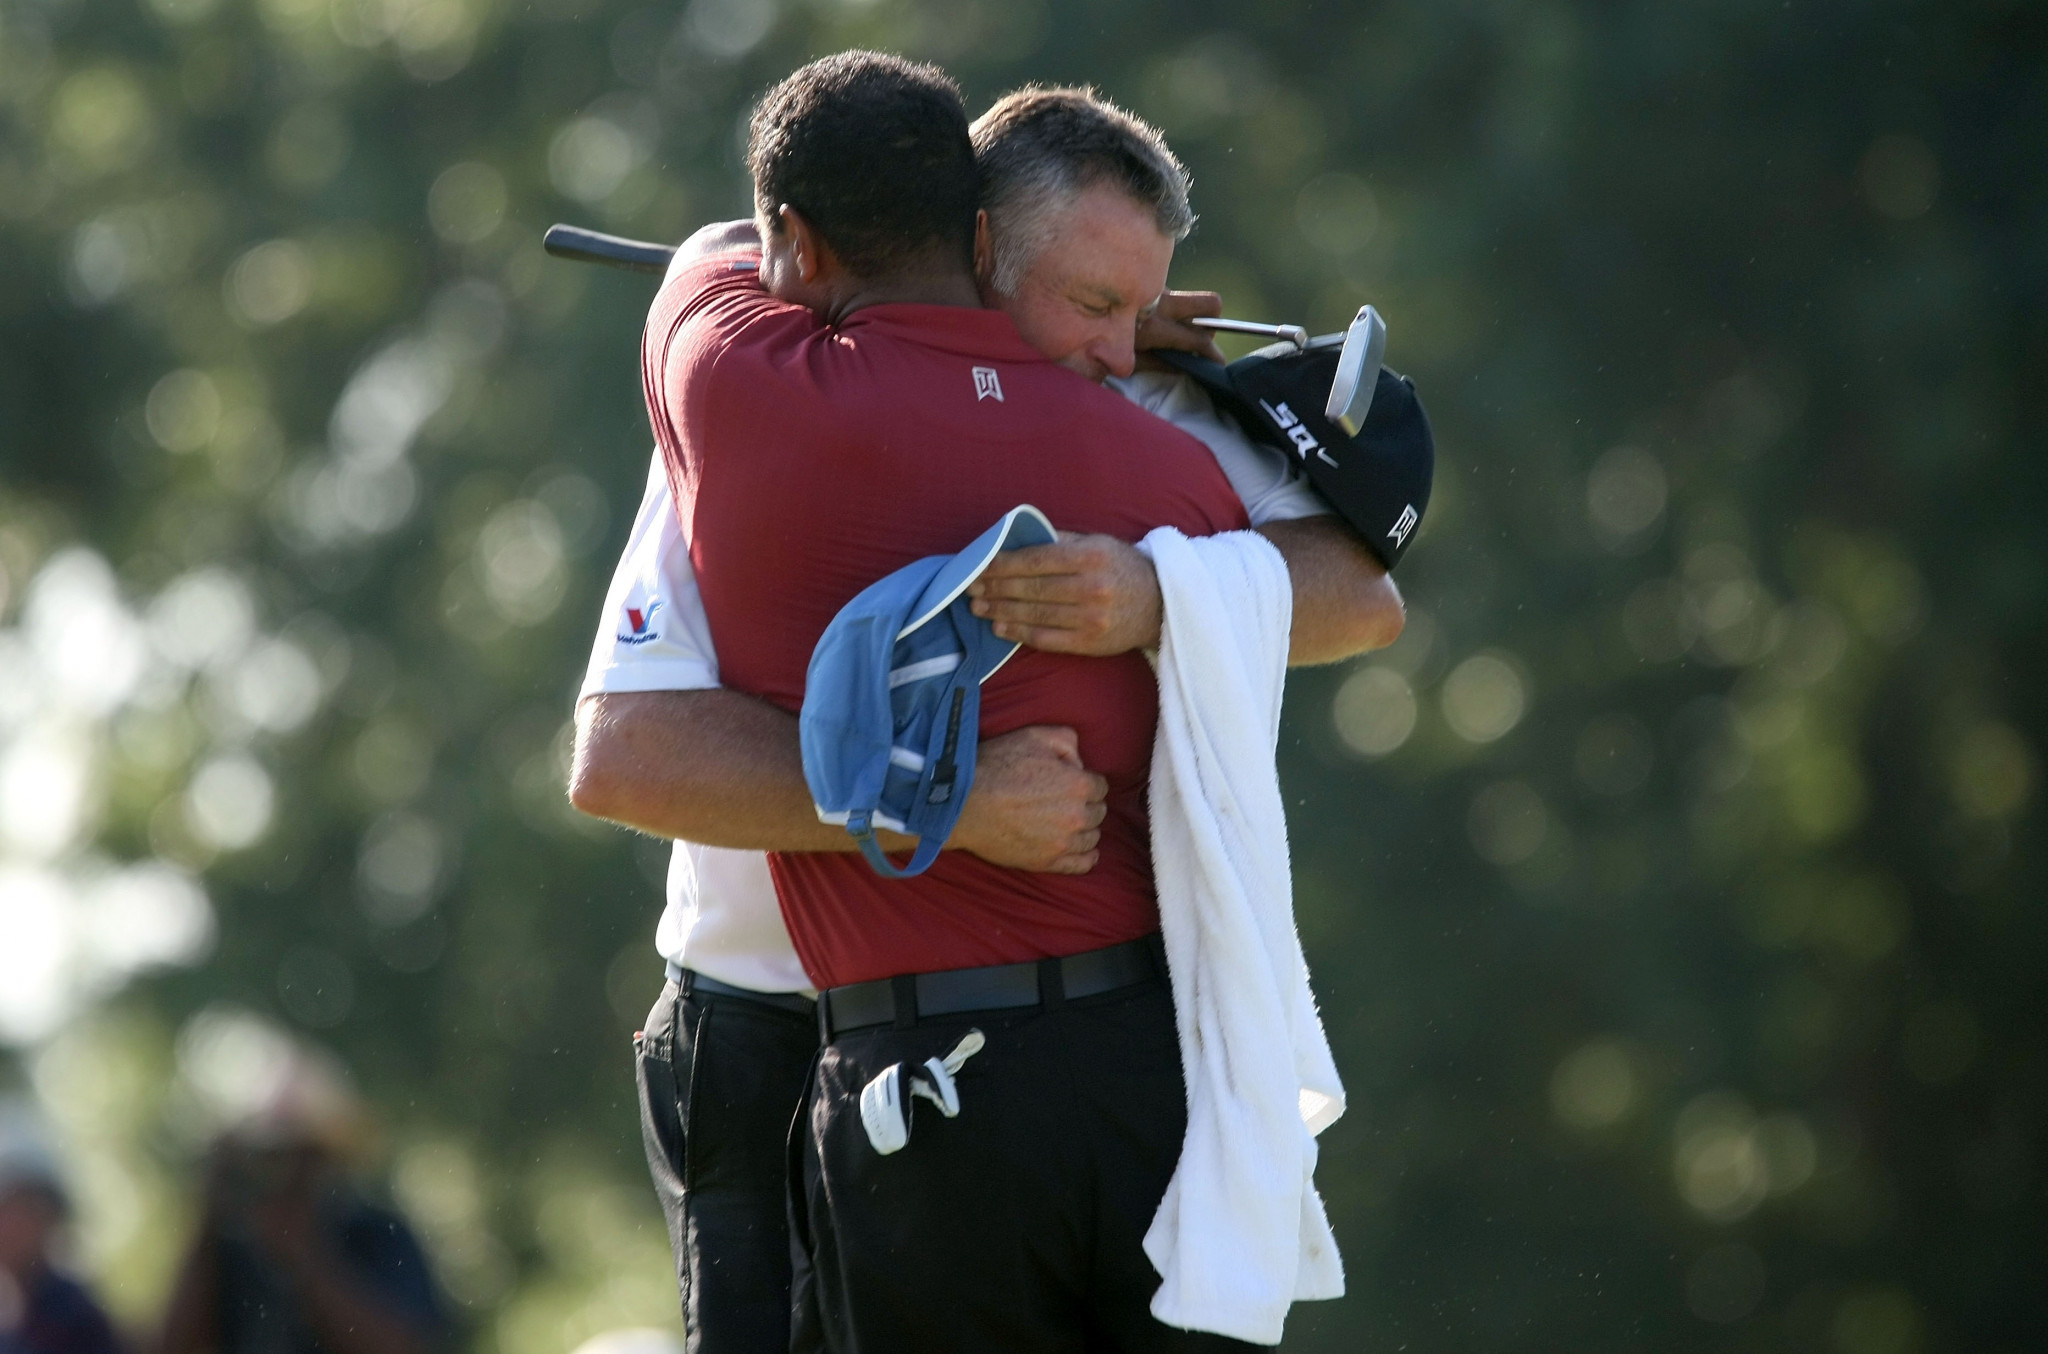 Tiger Woods won the last edition of the US PGA Championship held at Southern Hills Country Club, back in 2009 ©Getty Images